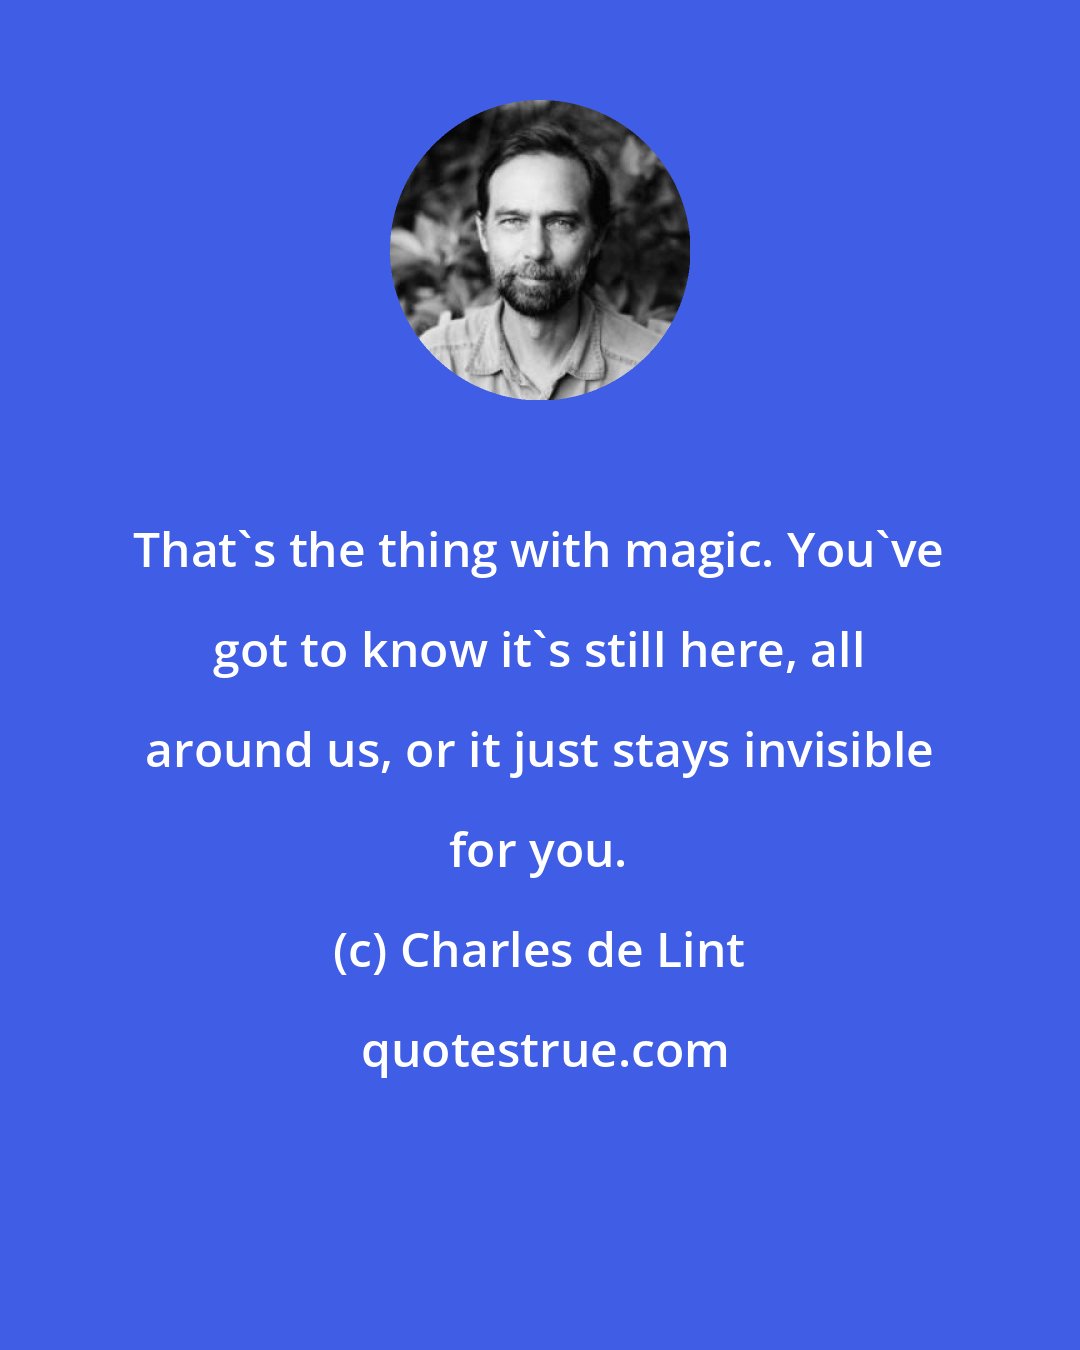 Charles de Lint: That's the thing with magic. You've got to know it's still here, all around us, or it just stays invisible for you.